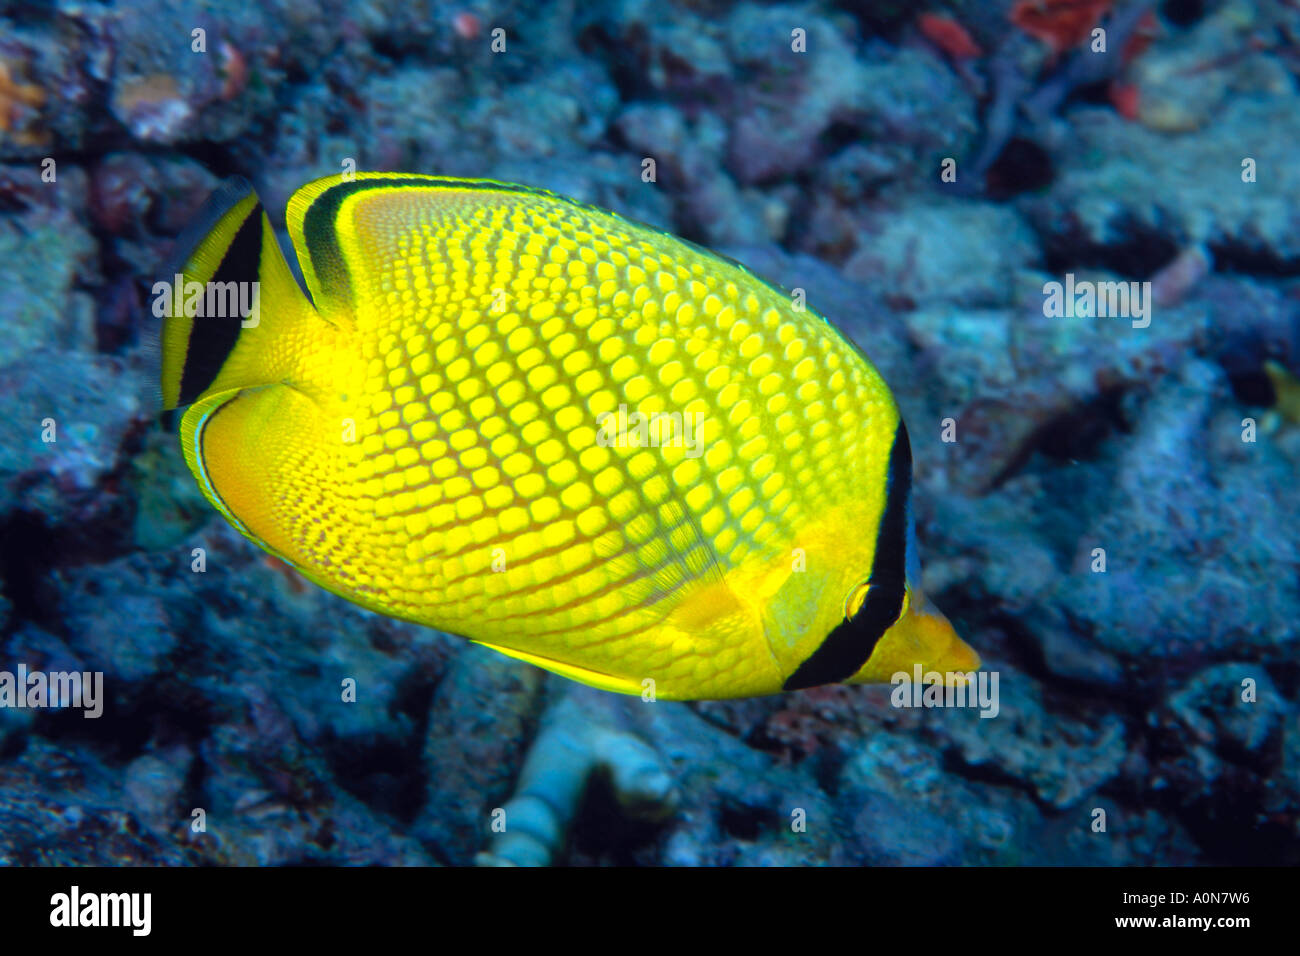 The latticed butterflyfish, Chaetodon rafflesi, feeds on sea anemones, polychaetes, and coral polyps. Indonesia. Stock Photo